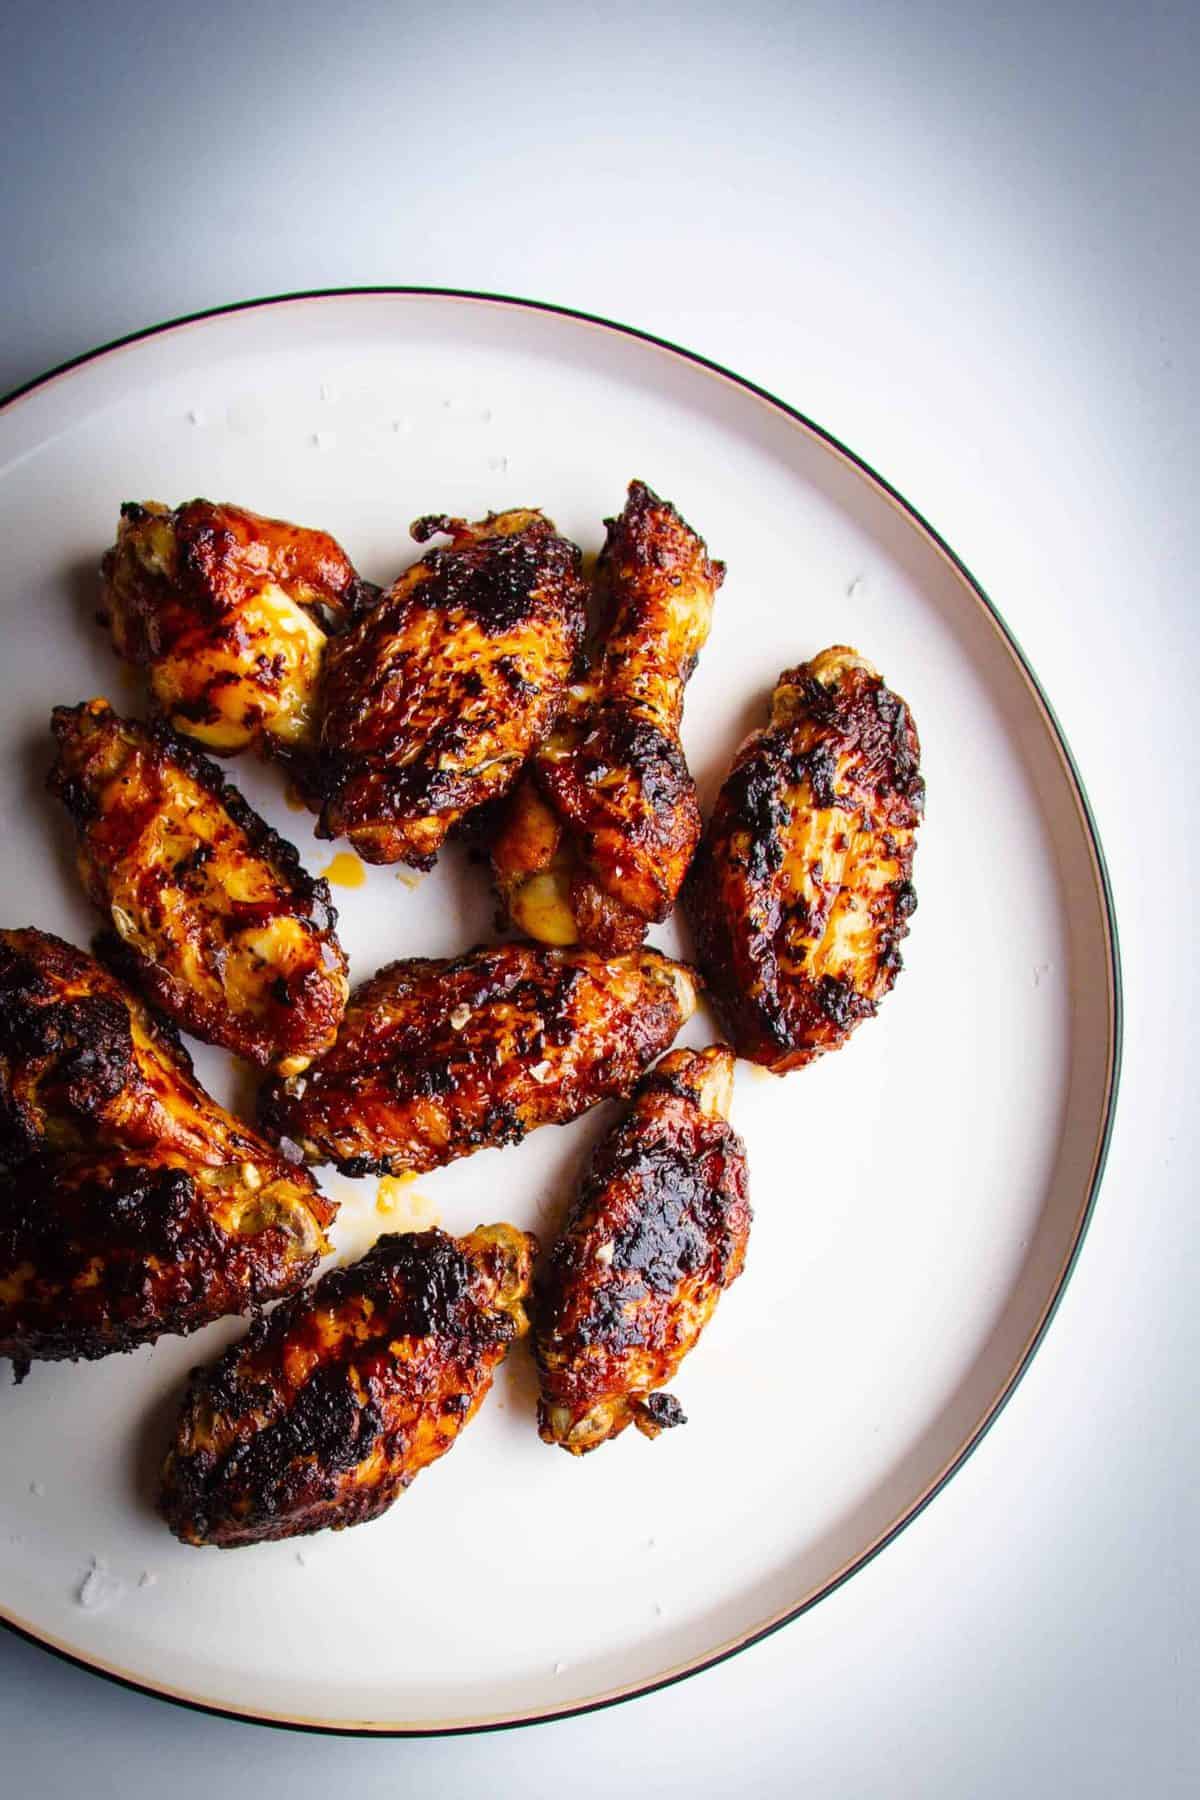 Marmite and chili chicken wings on a plate.